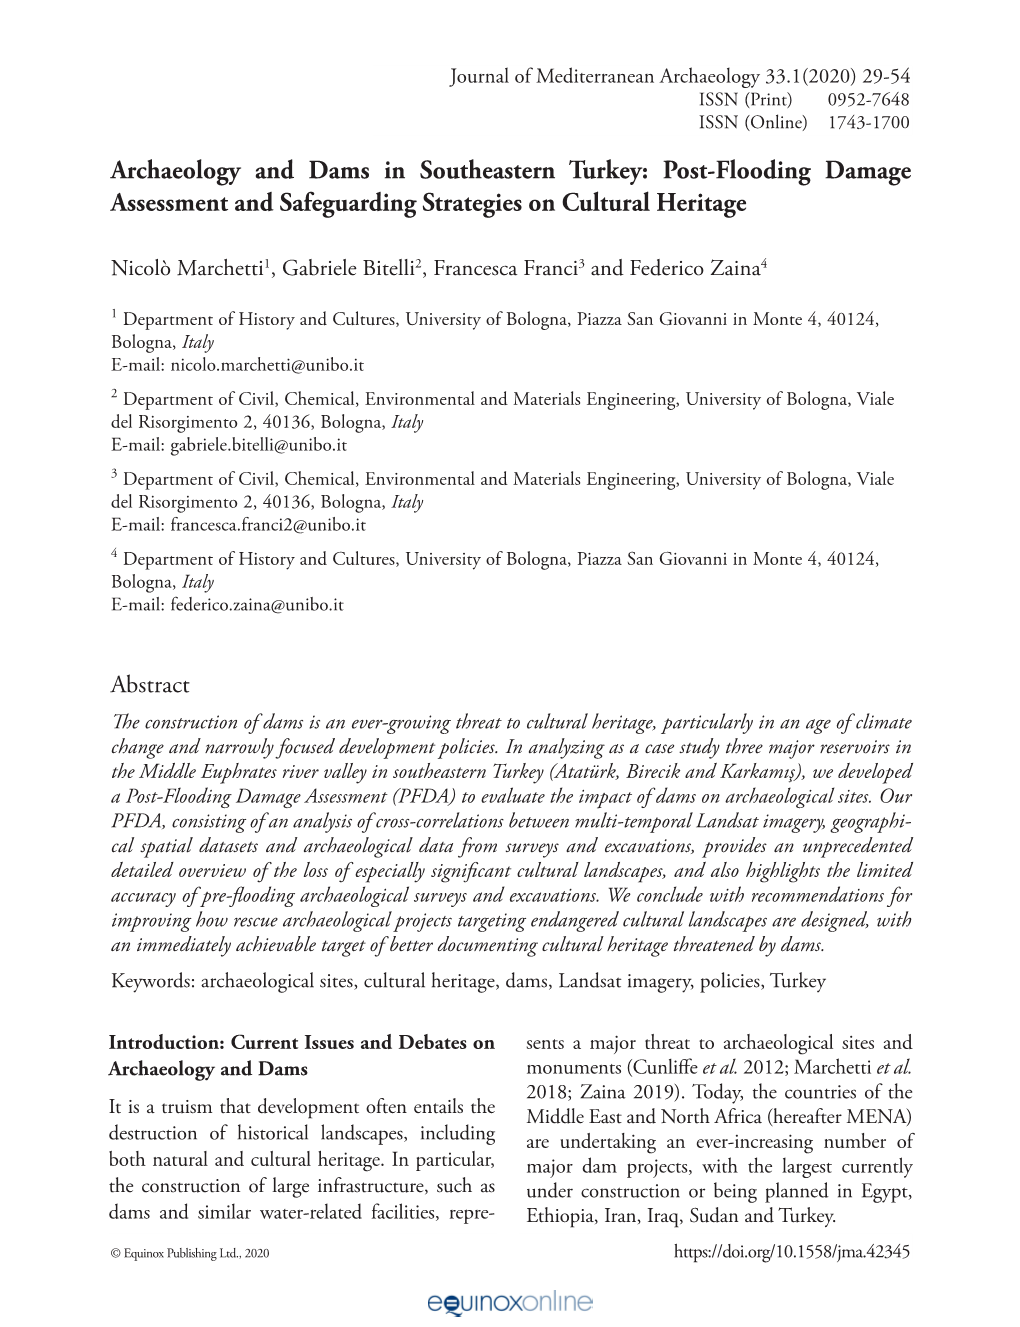 Archaeology and Dams in Southeastern Turkey: Post-Flooding Damage Assessment and Safeguarding Strategies on Cultural Heritage